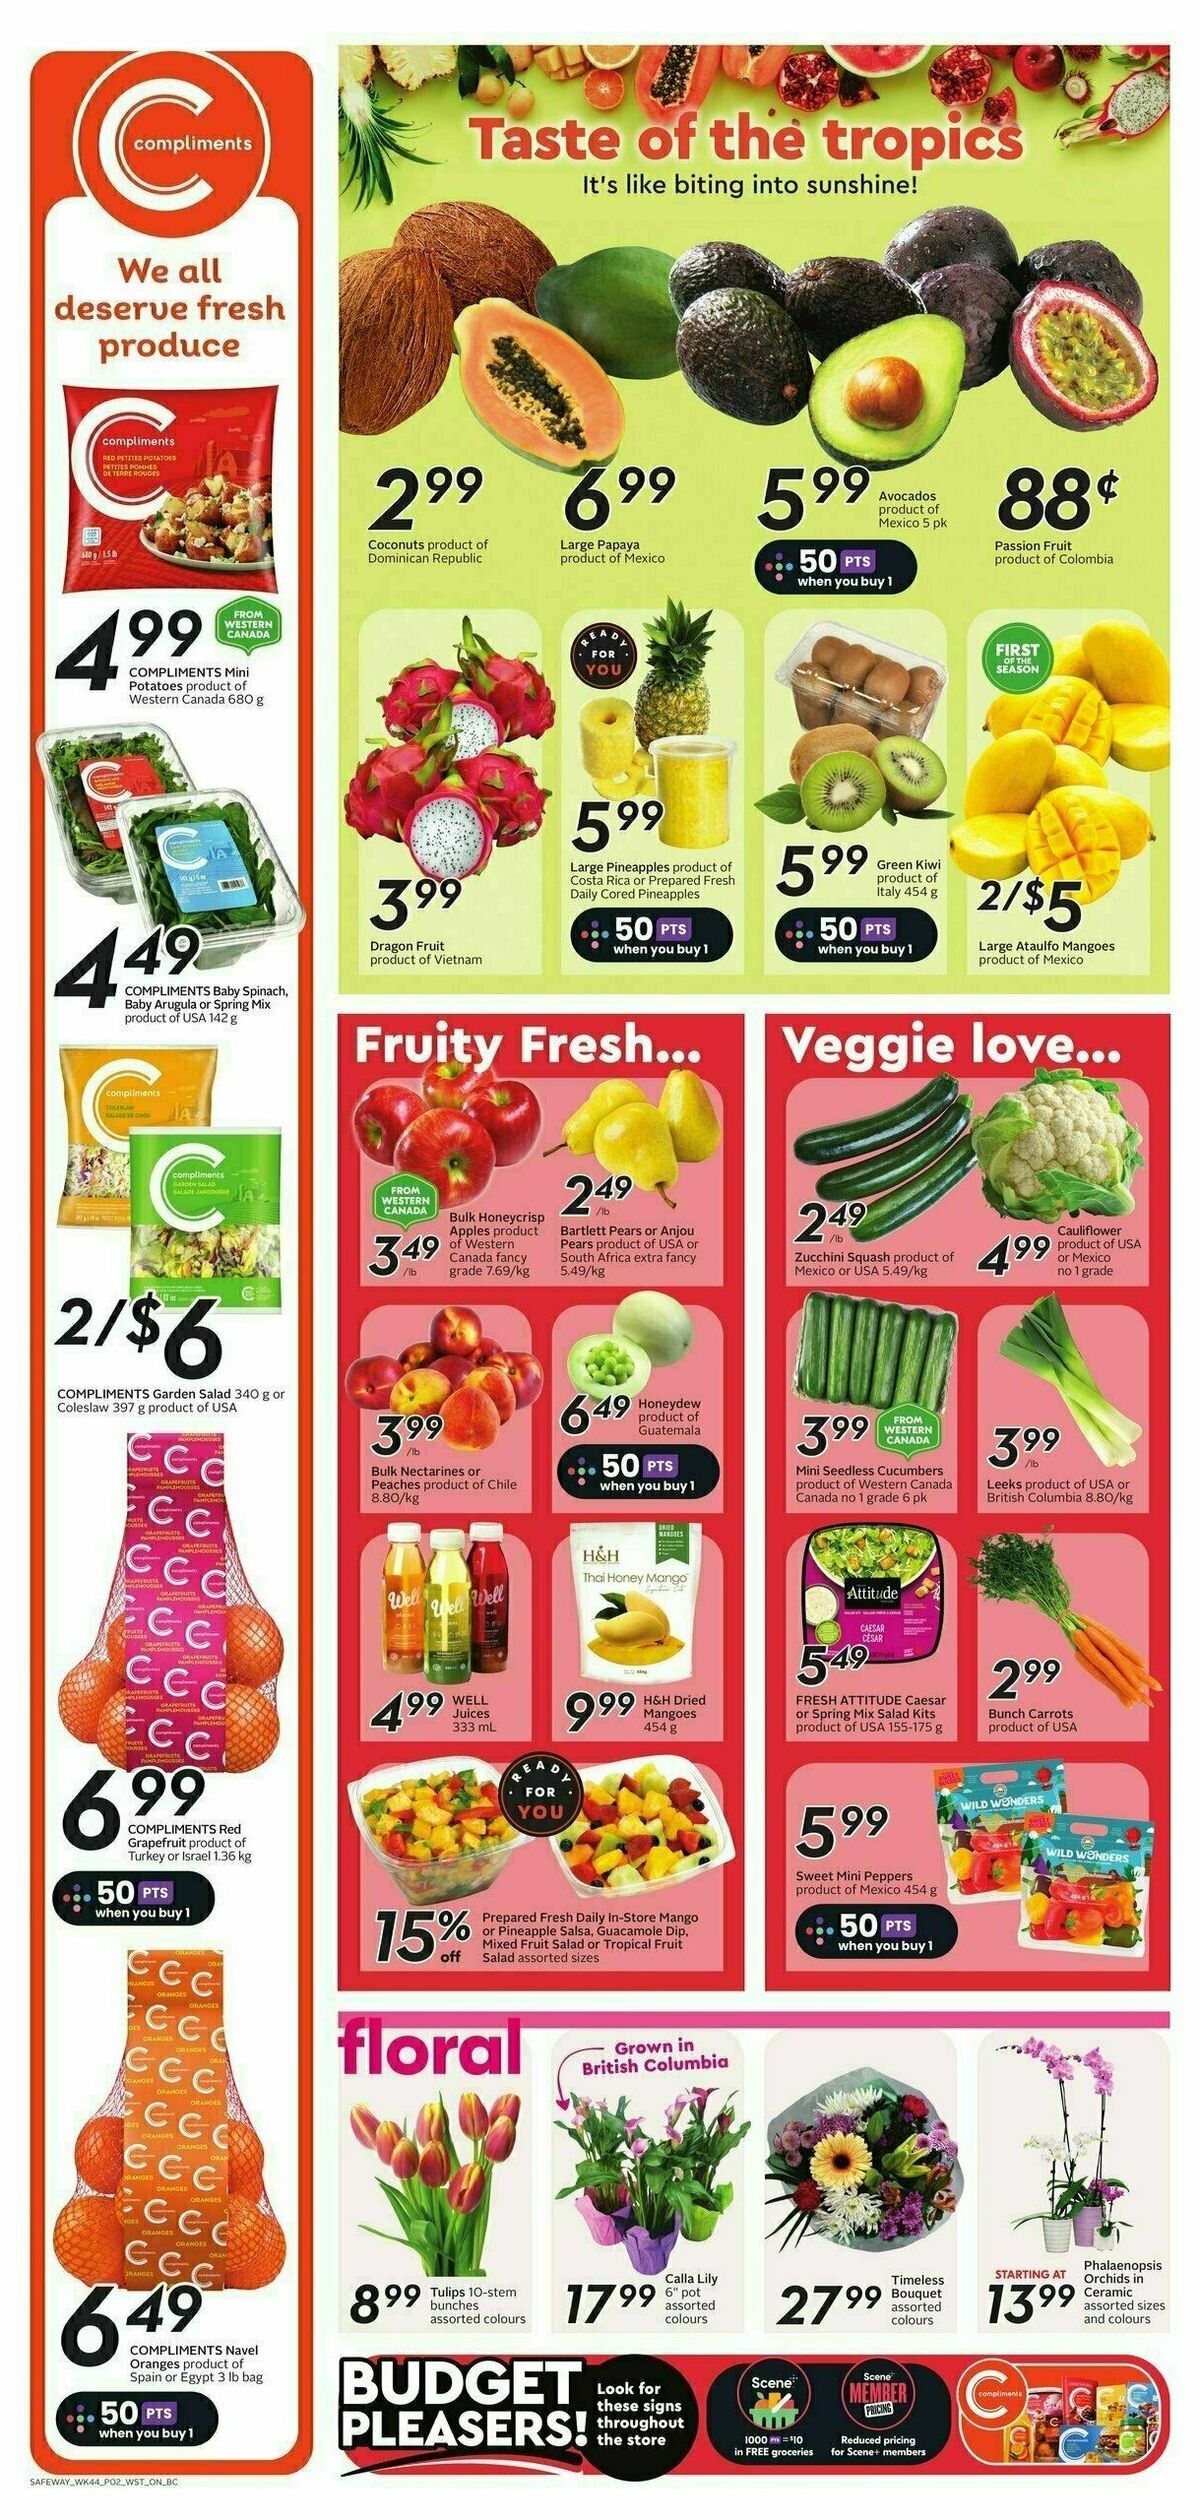 Safeway Flyer from February 29